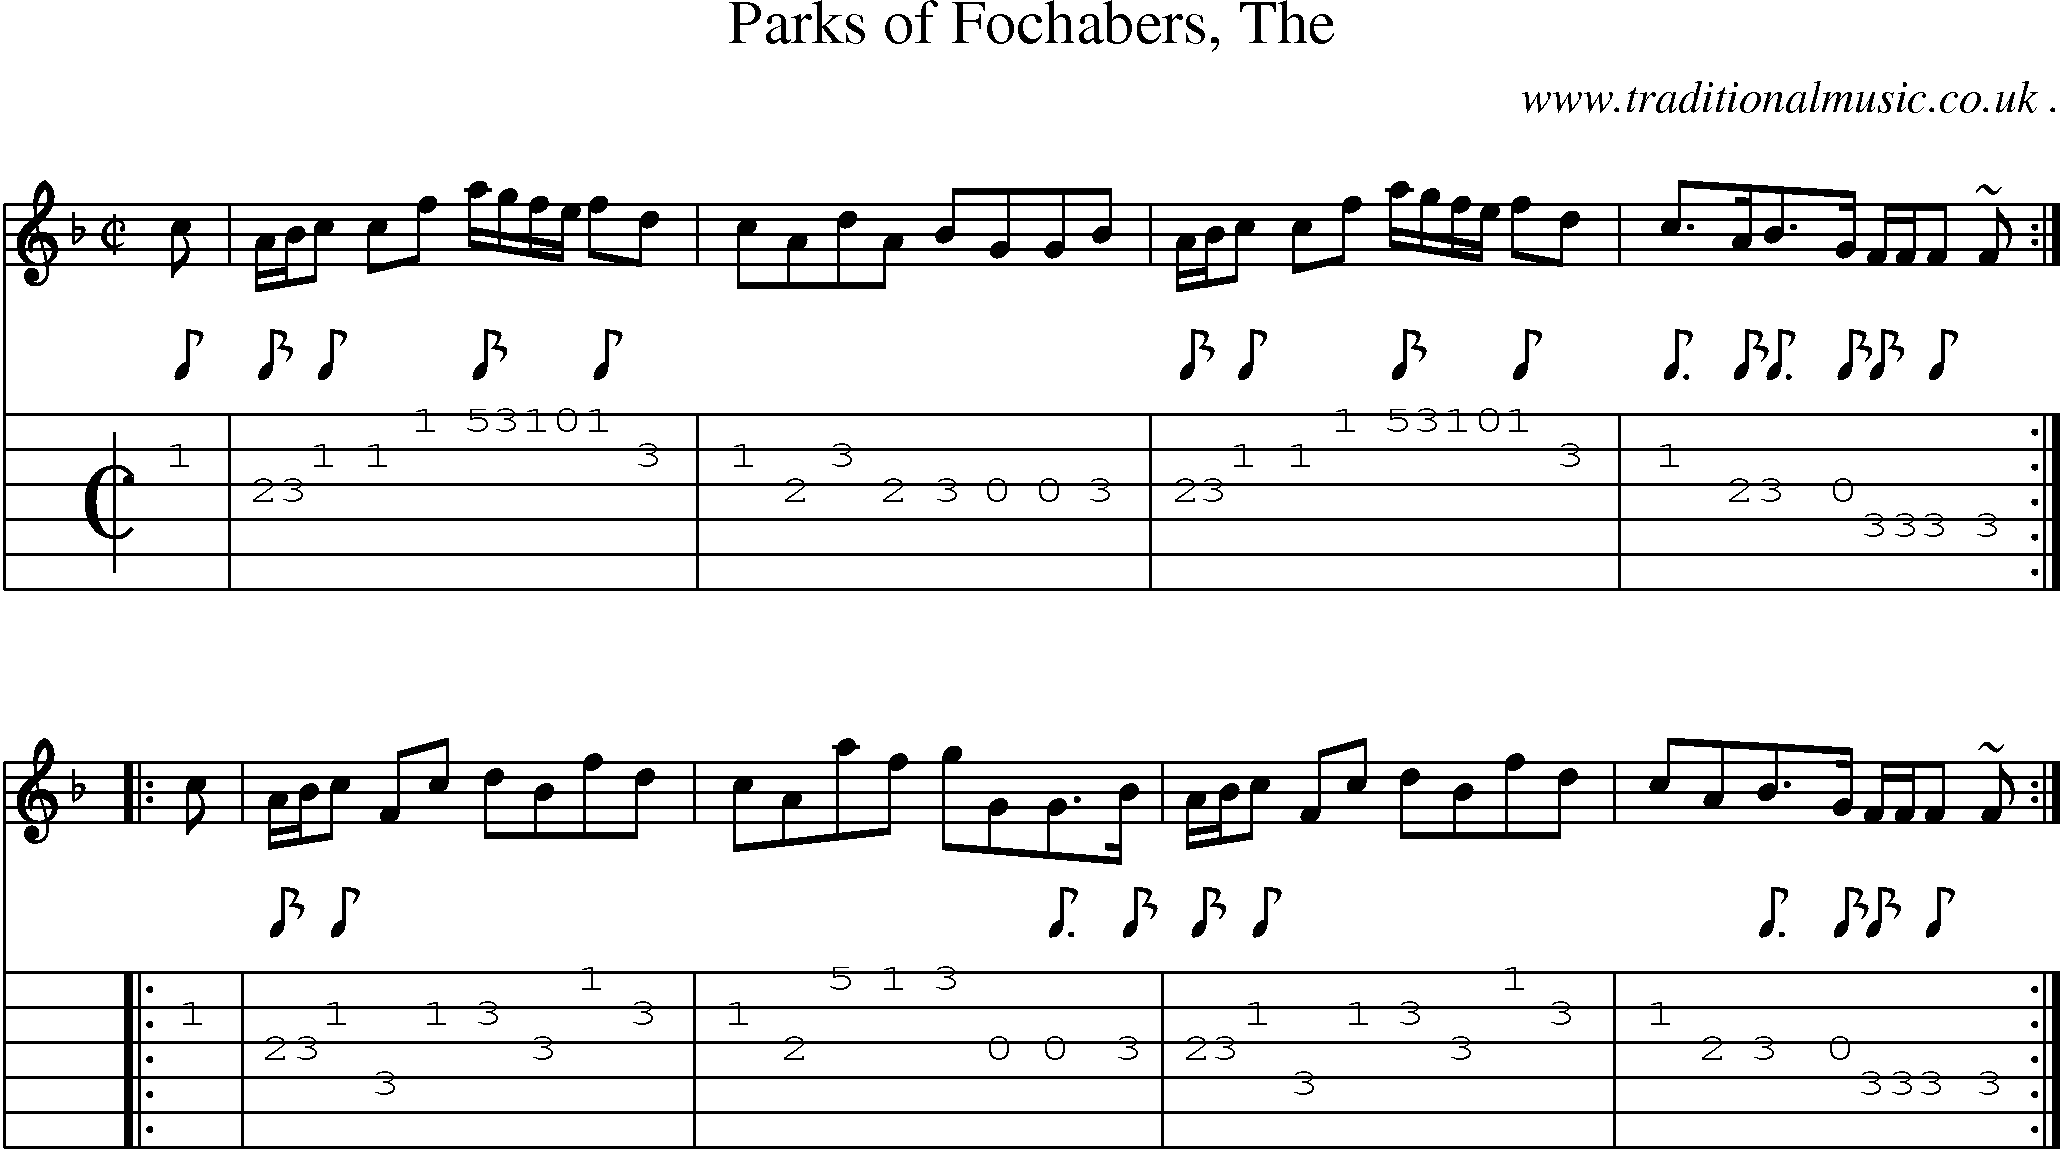 Sheet-music  score, Chords and Guitar Tabs for Parks Of Fochabers The